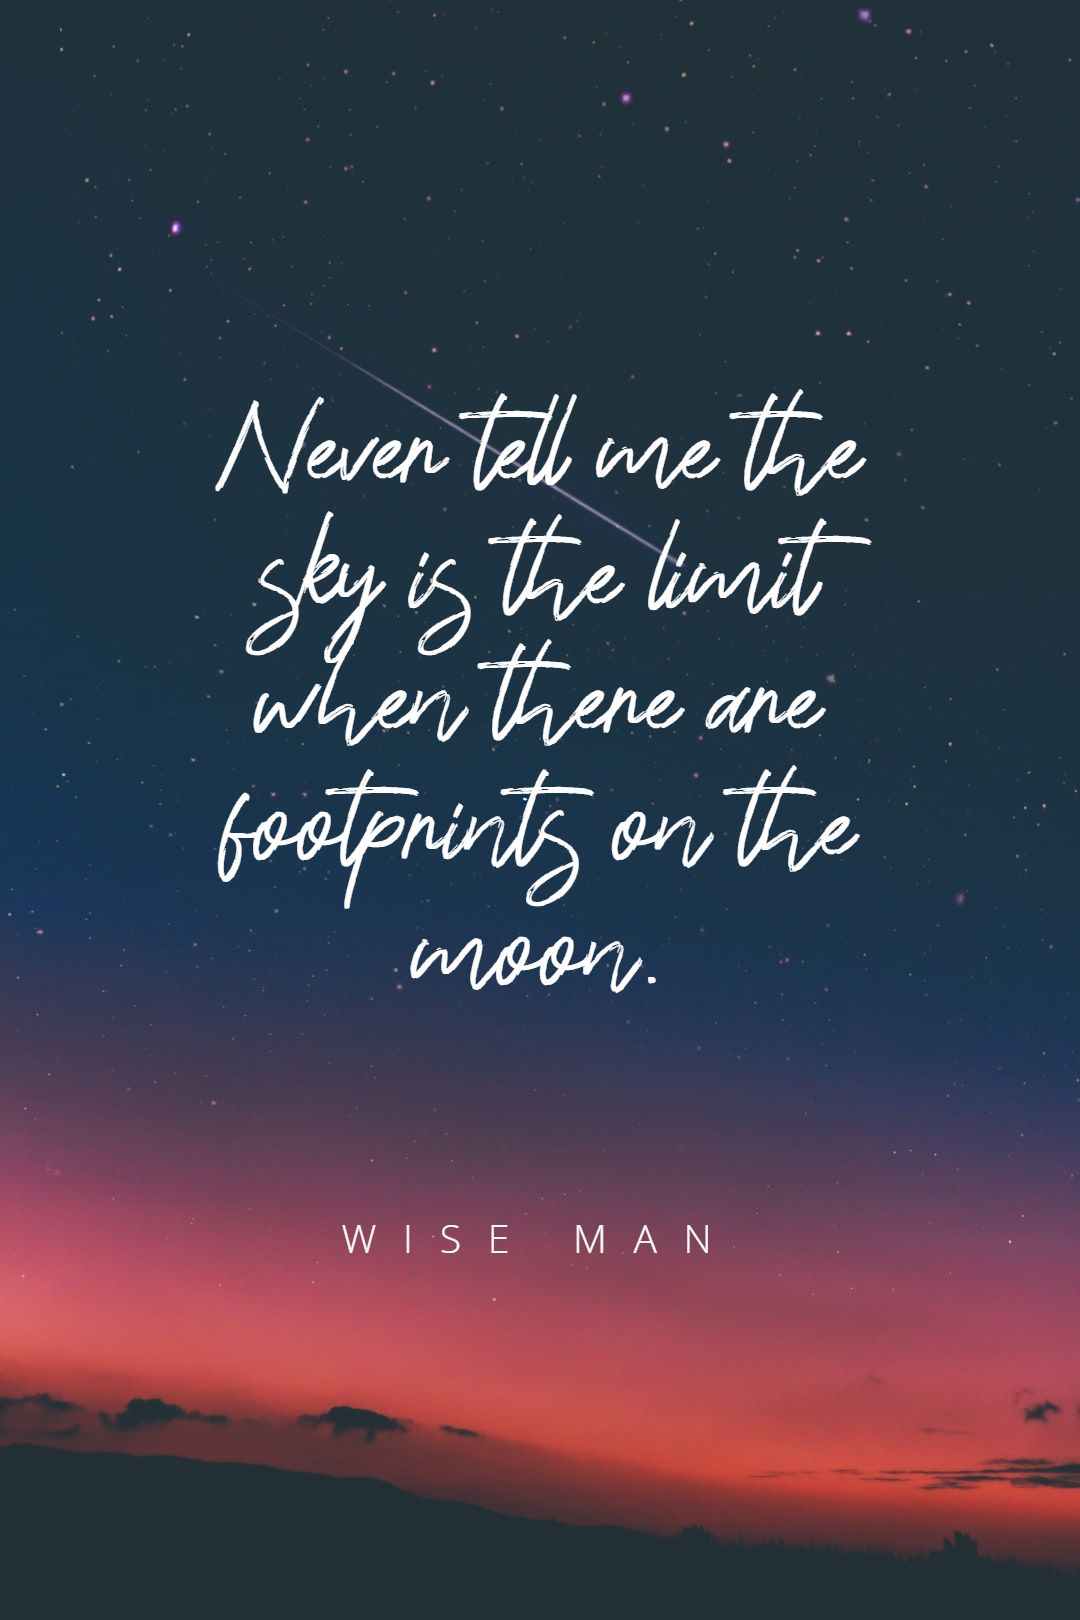 wise man’s quote about possibility. Never tell me the sky…